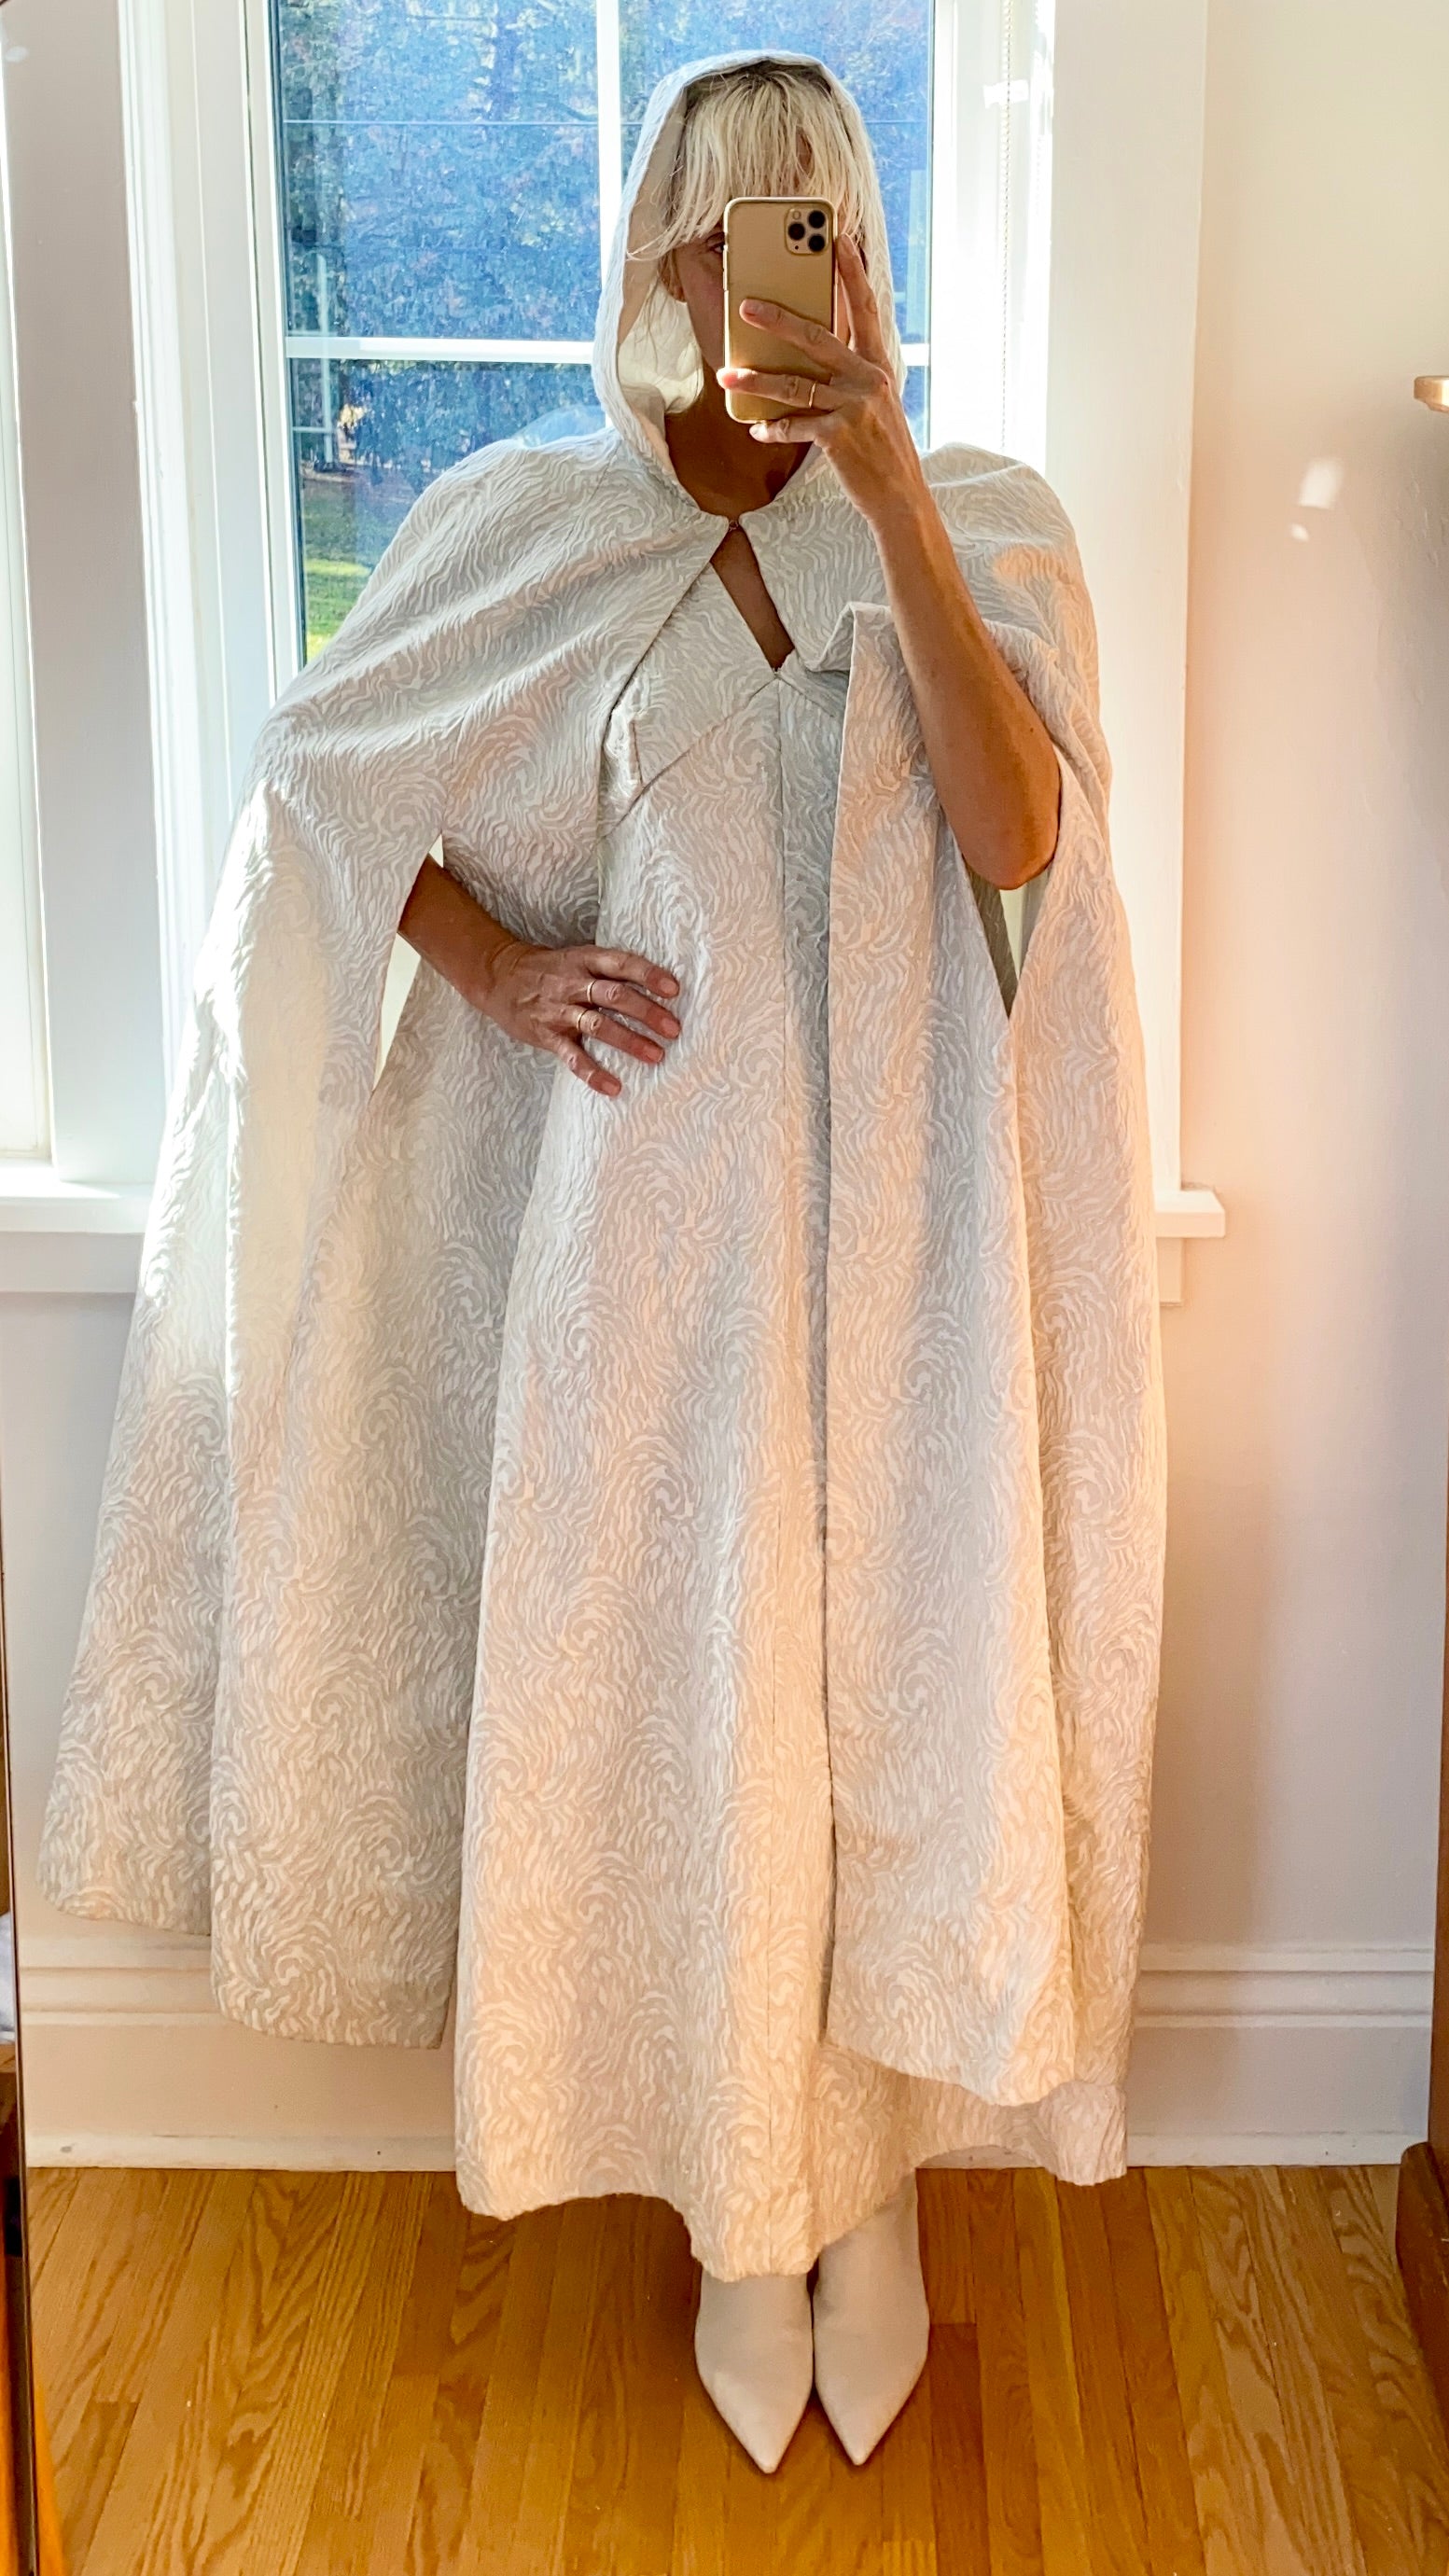 VINTAGE 1960s Silver and Ivory Brocade Dress and Cape